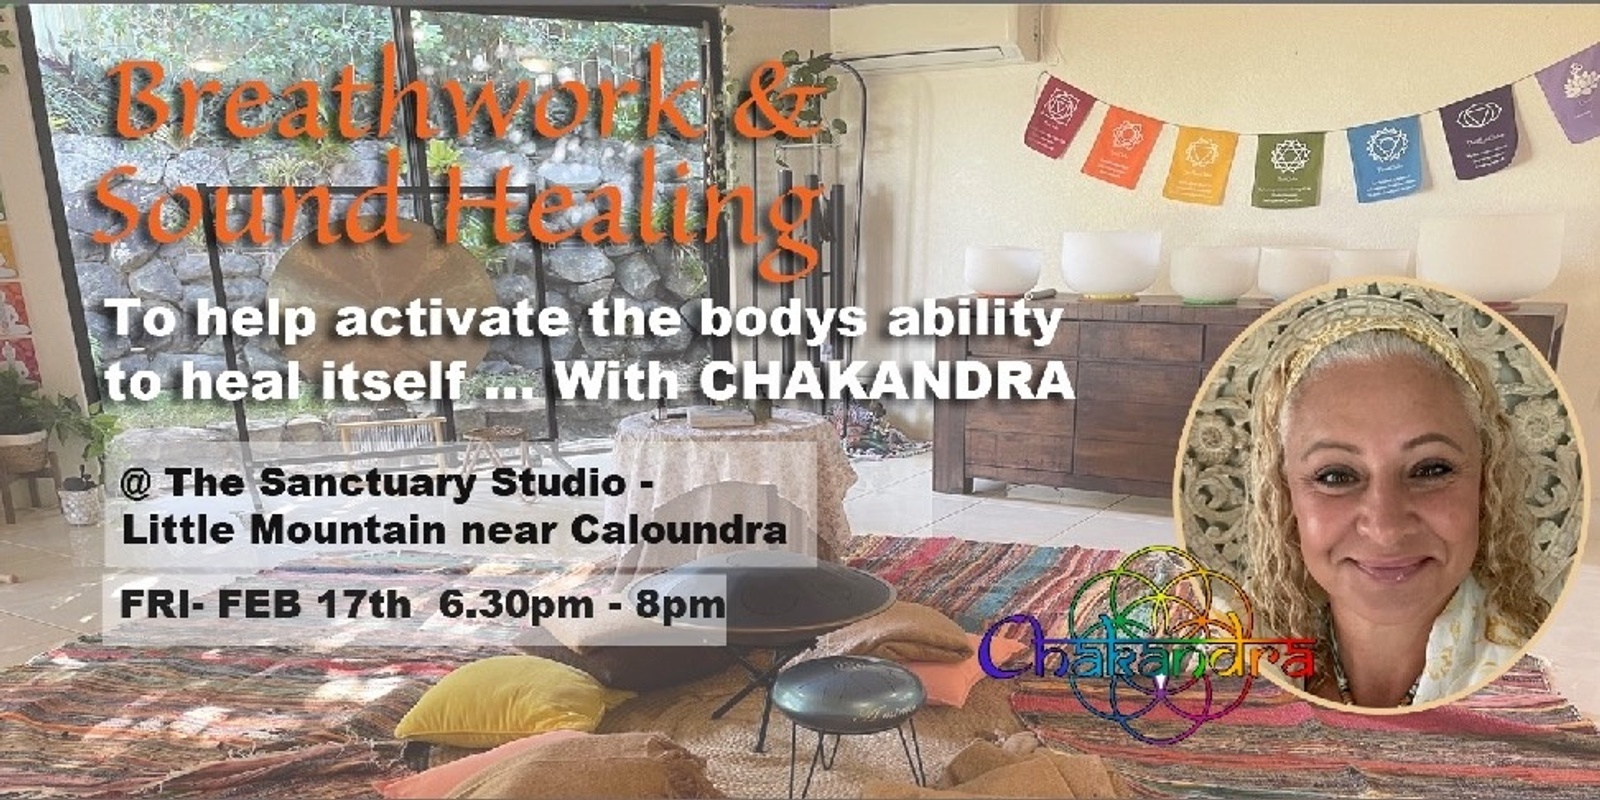 Banner image for Breath work & Sound Healing to Help the body activate it's ability to HEAL itself with CHAKANDRA